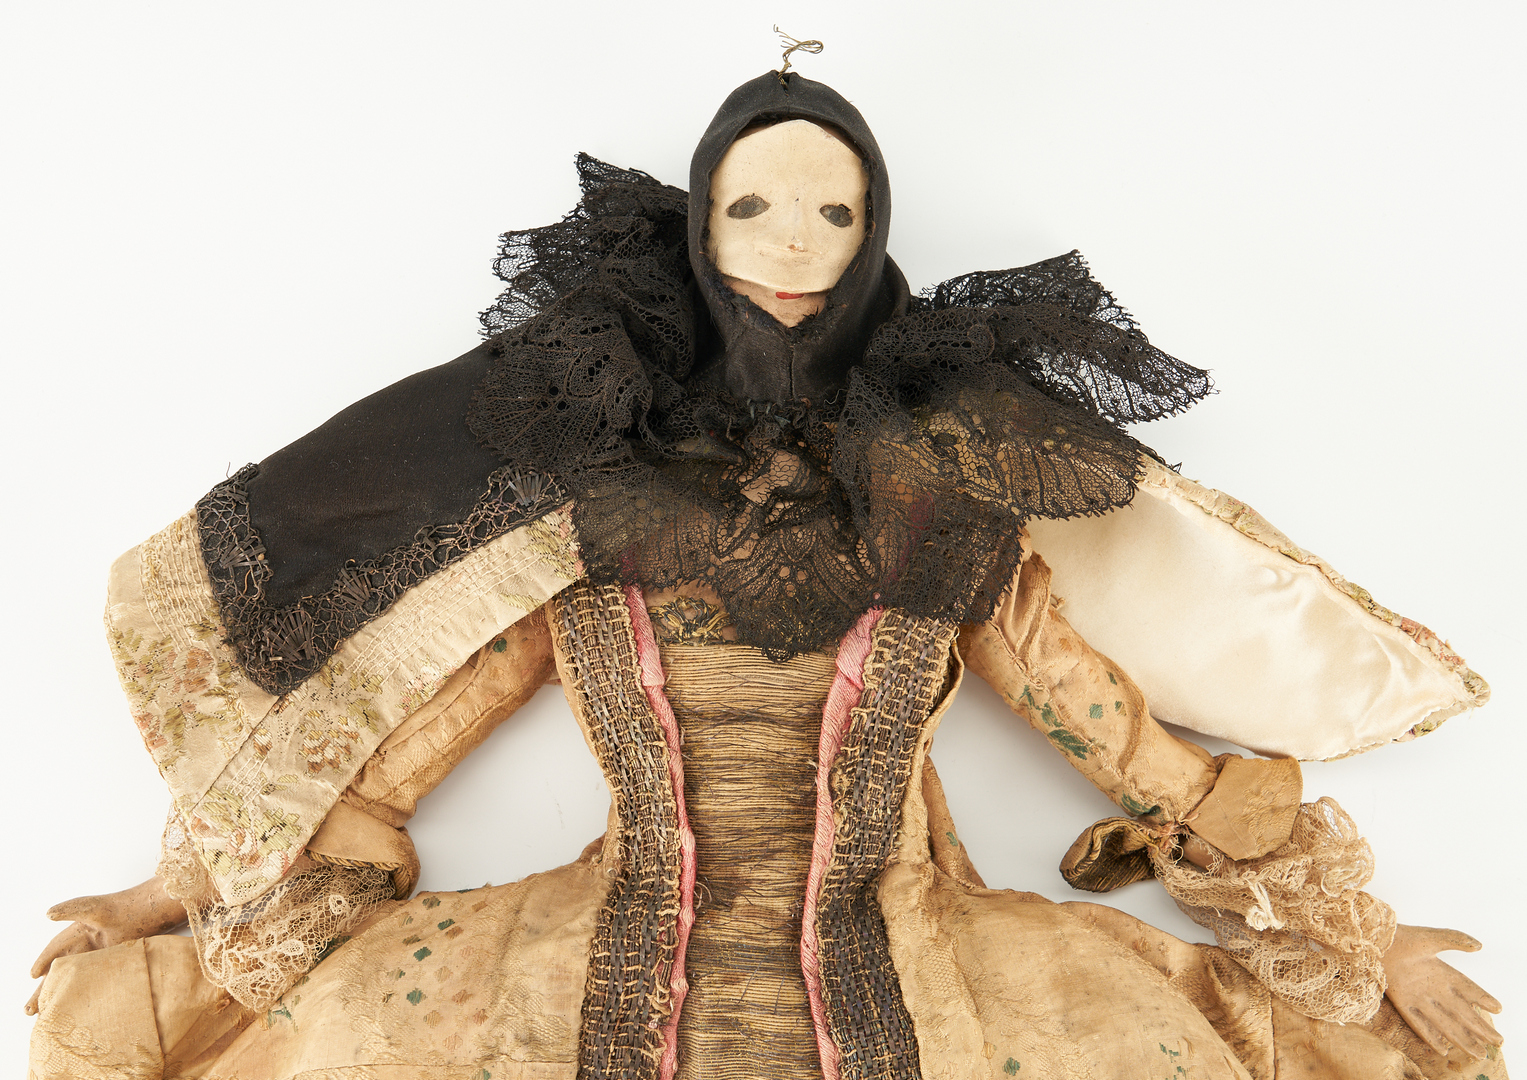 Lot 502: Italian Masked Doll or Marionette